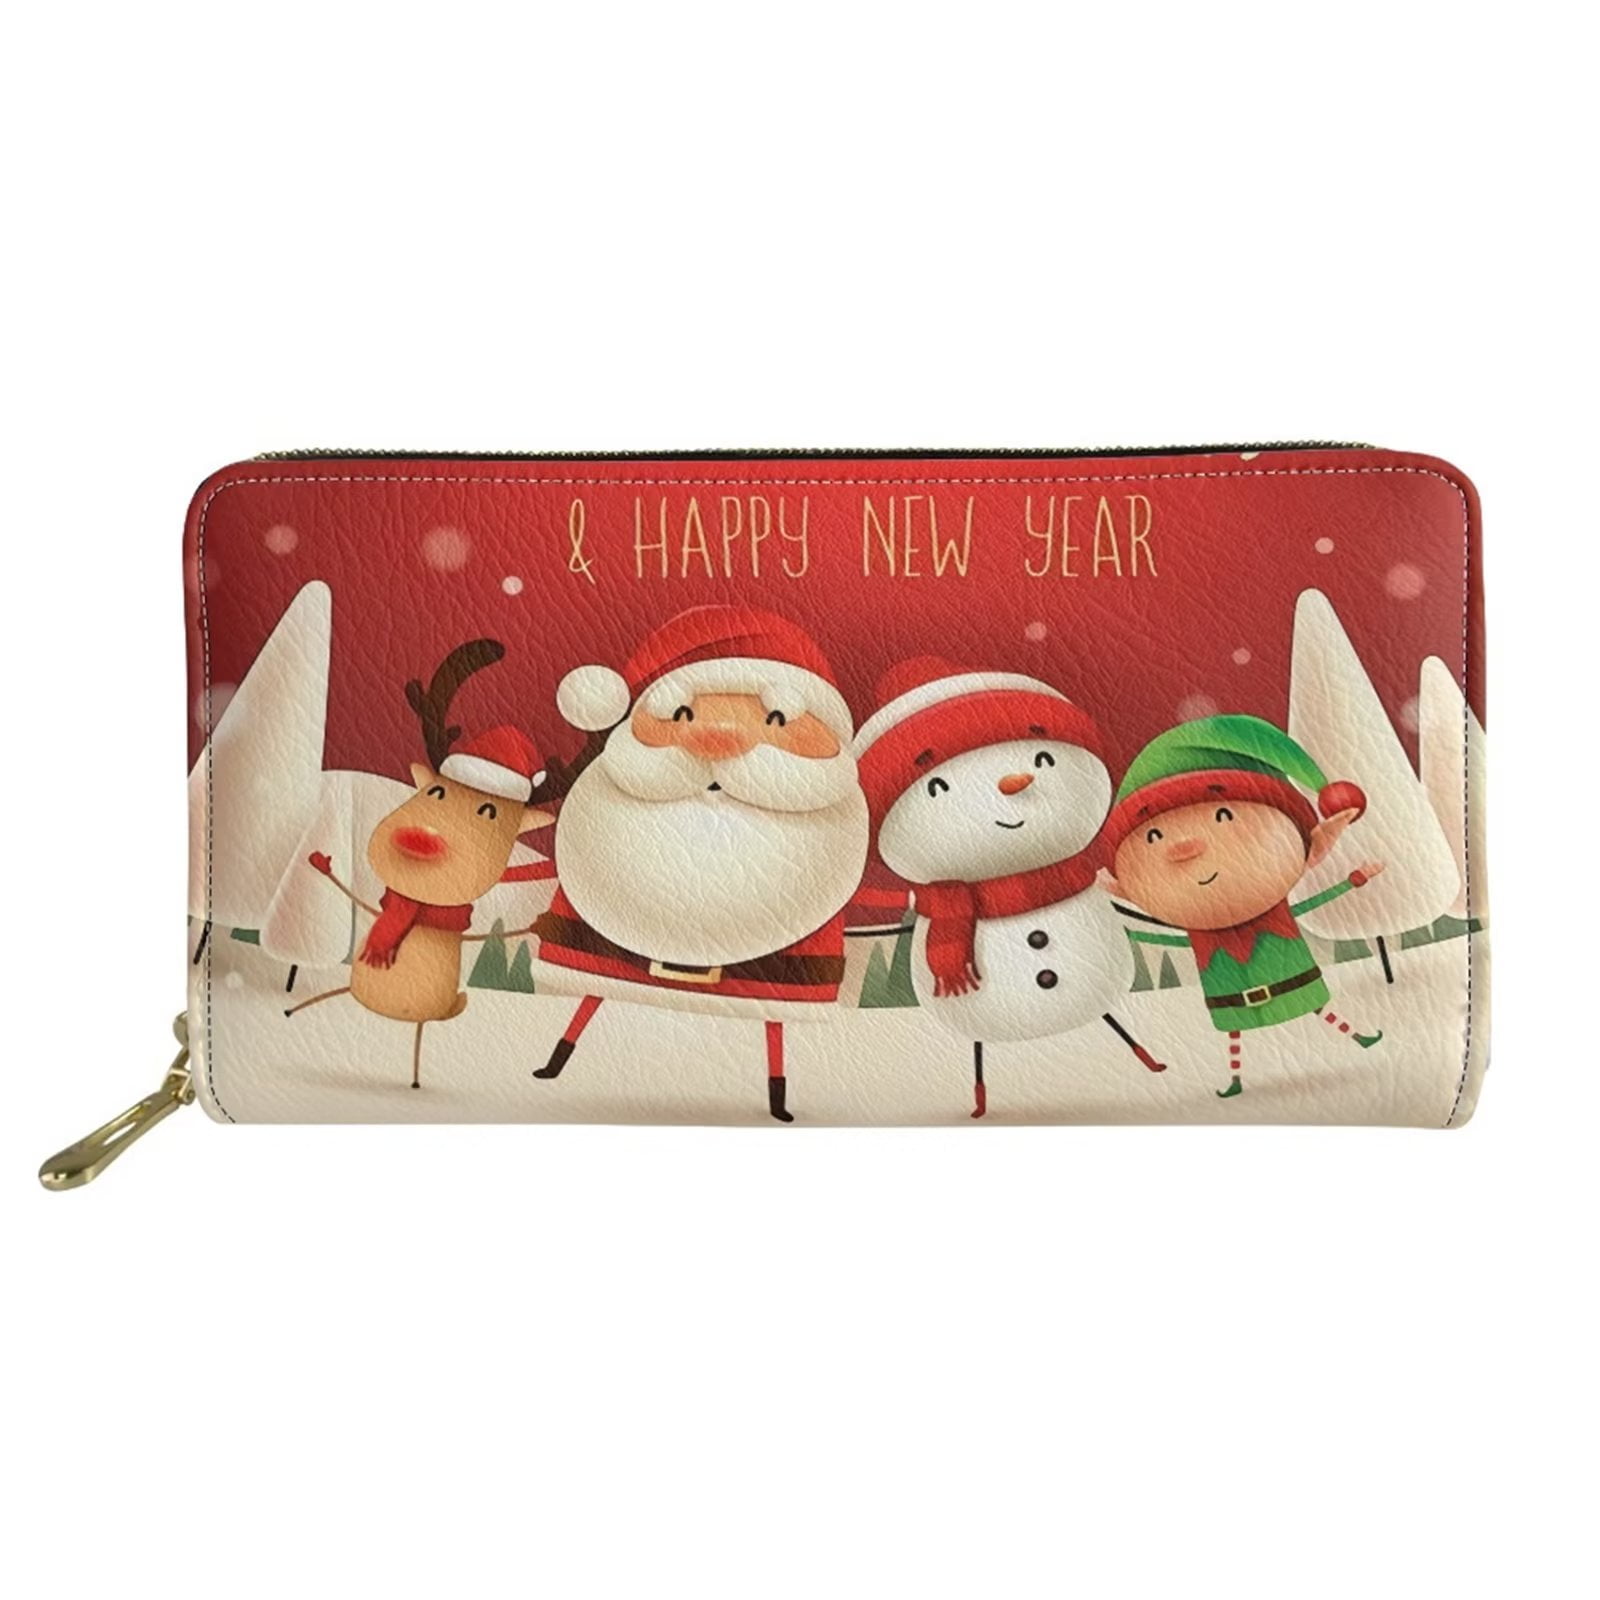 Christmas Santa Claus Crossbody Bags for Women Small Purse Chain Shoulder  Bags Hand Bags for Trip Work Gifts: Handbags: Amazon.com